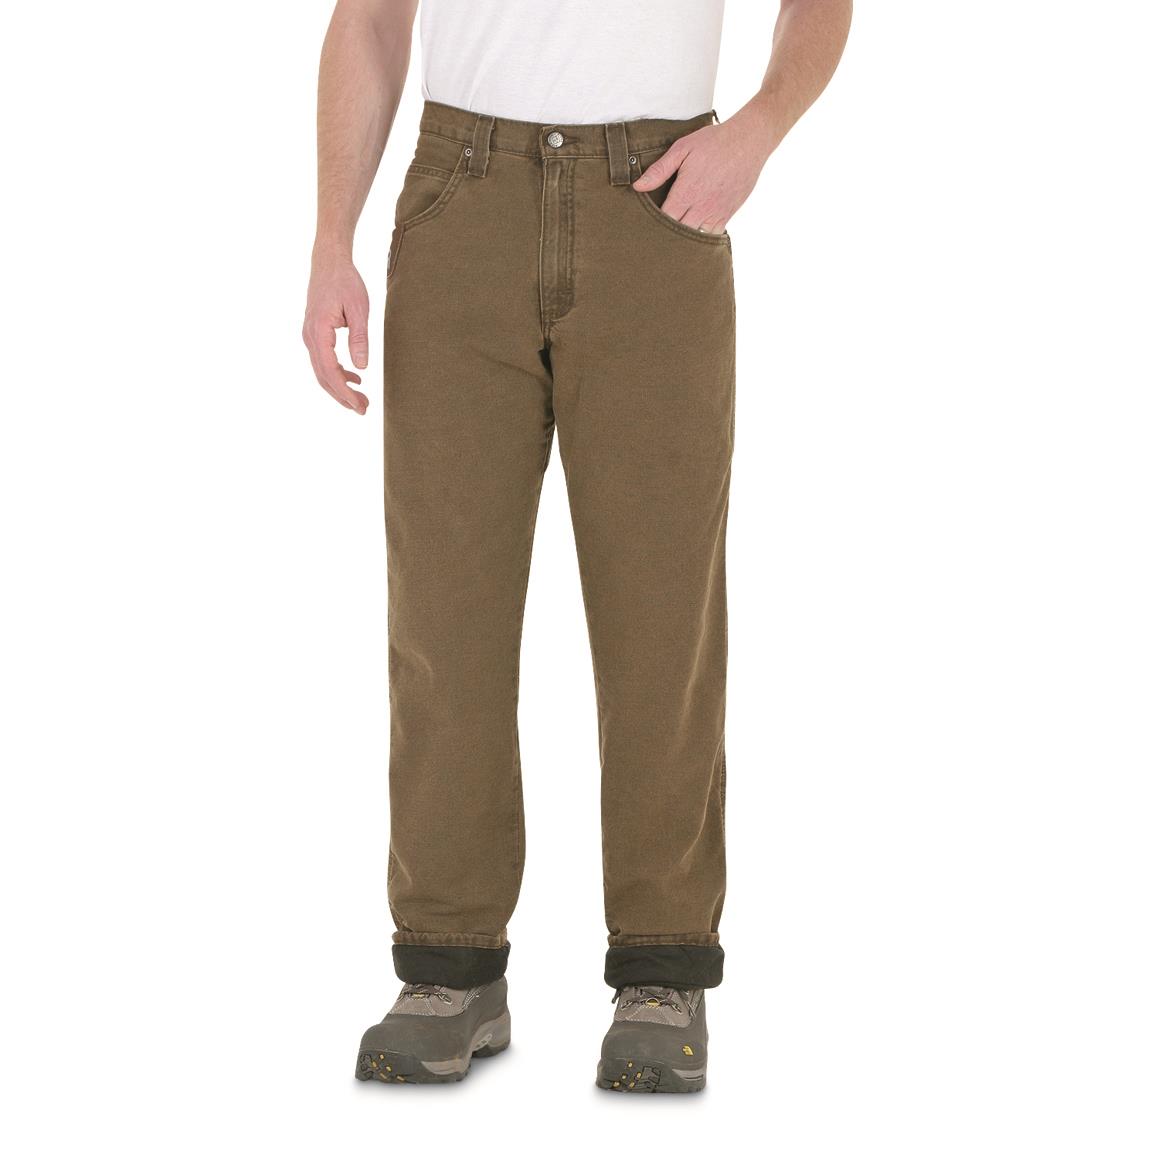 riggs insulated work pants